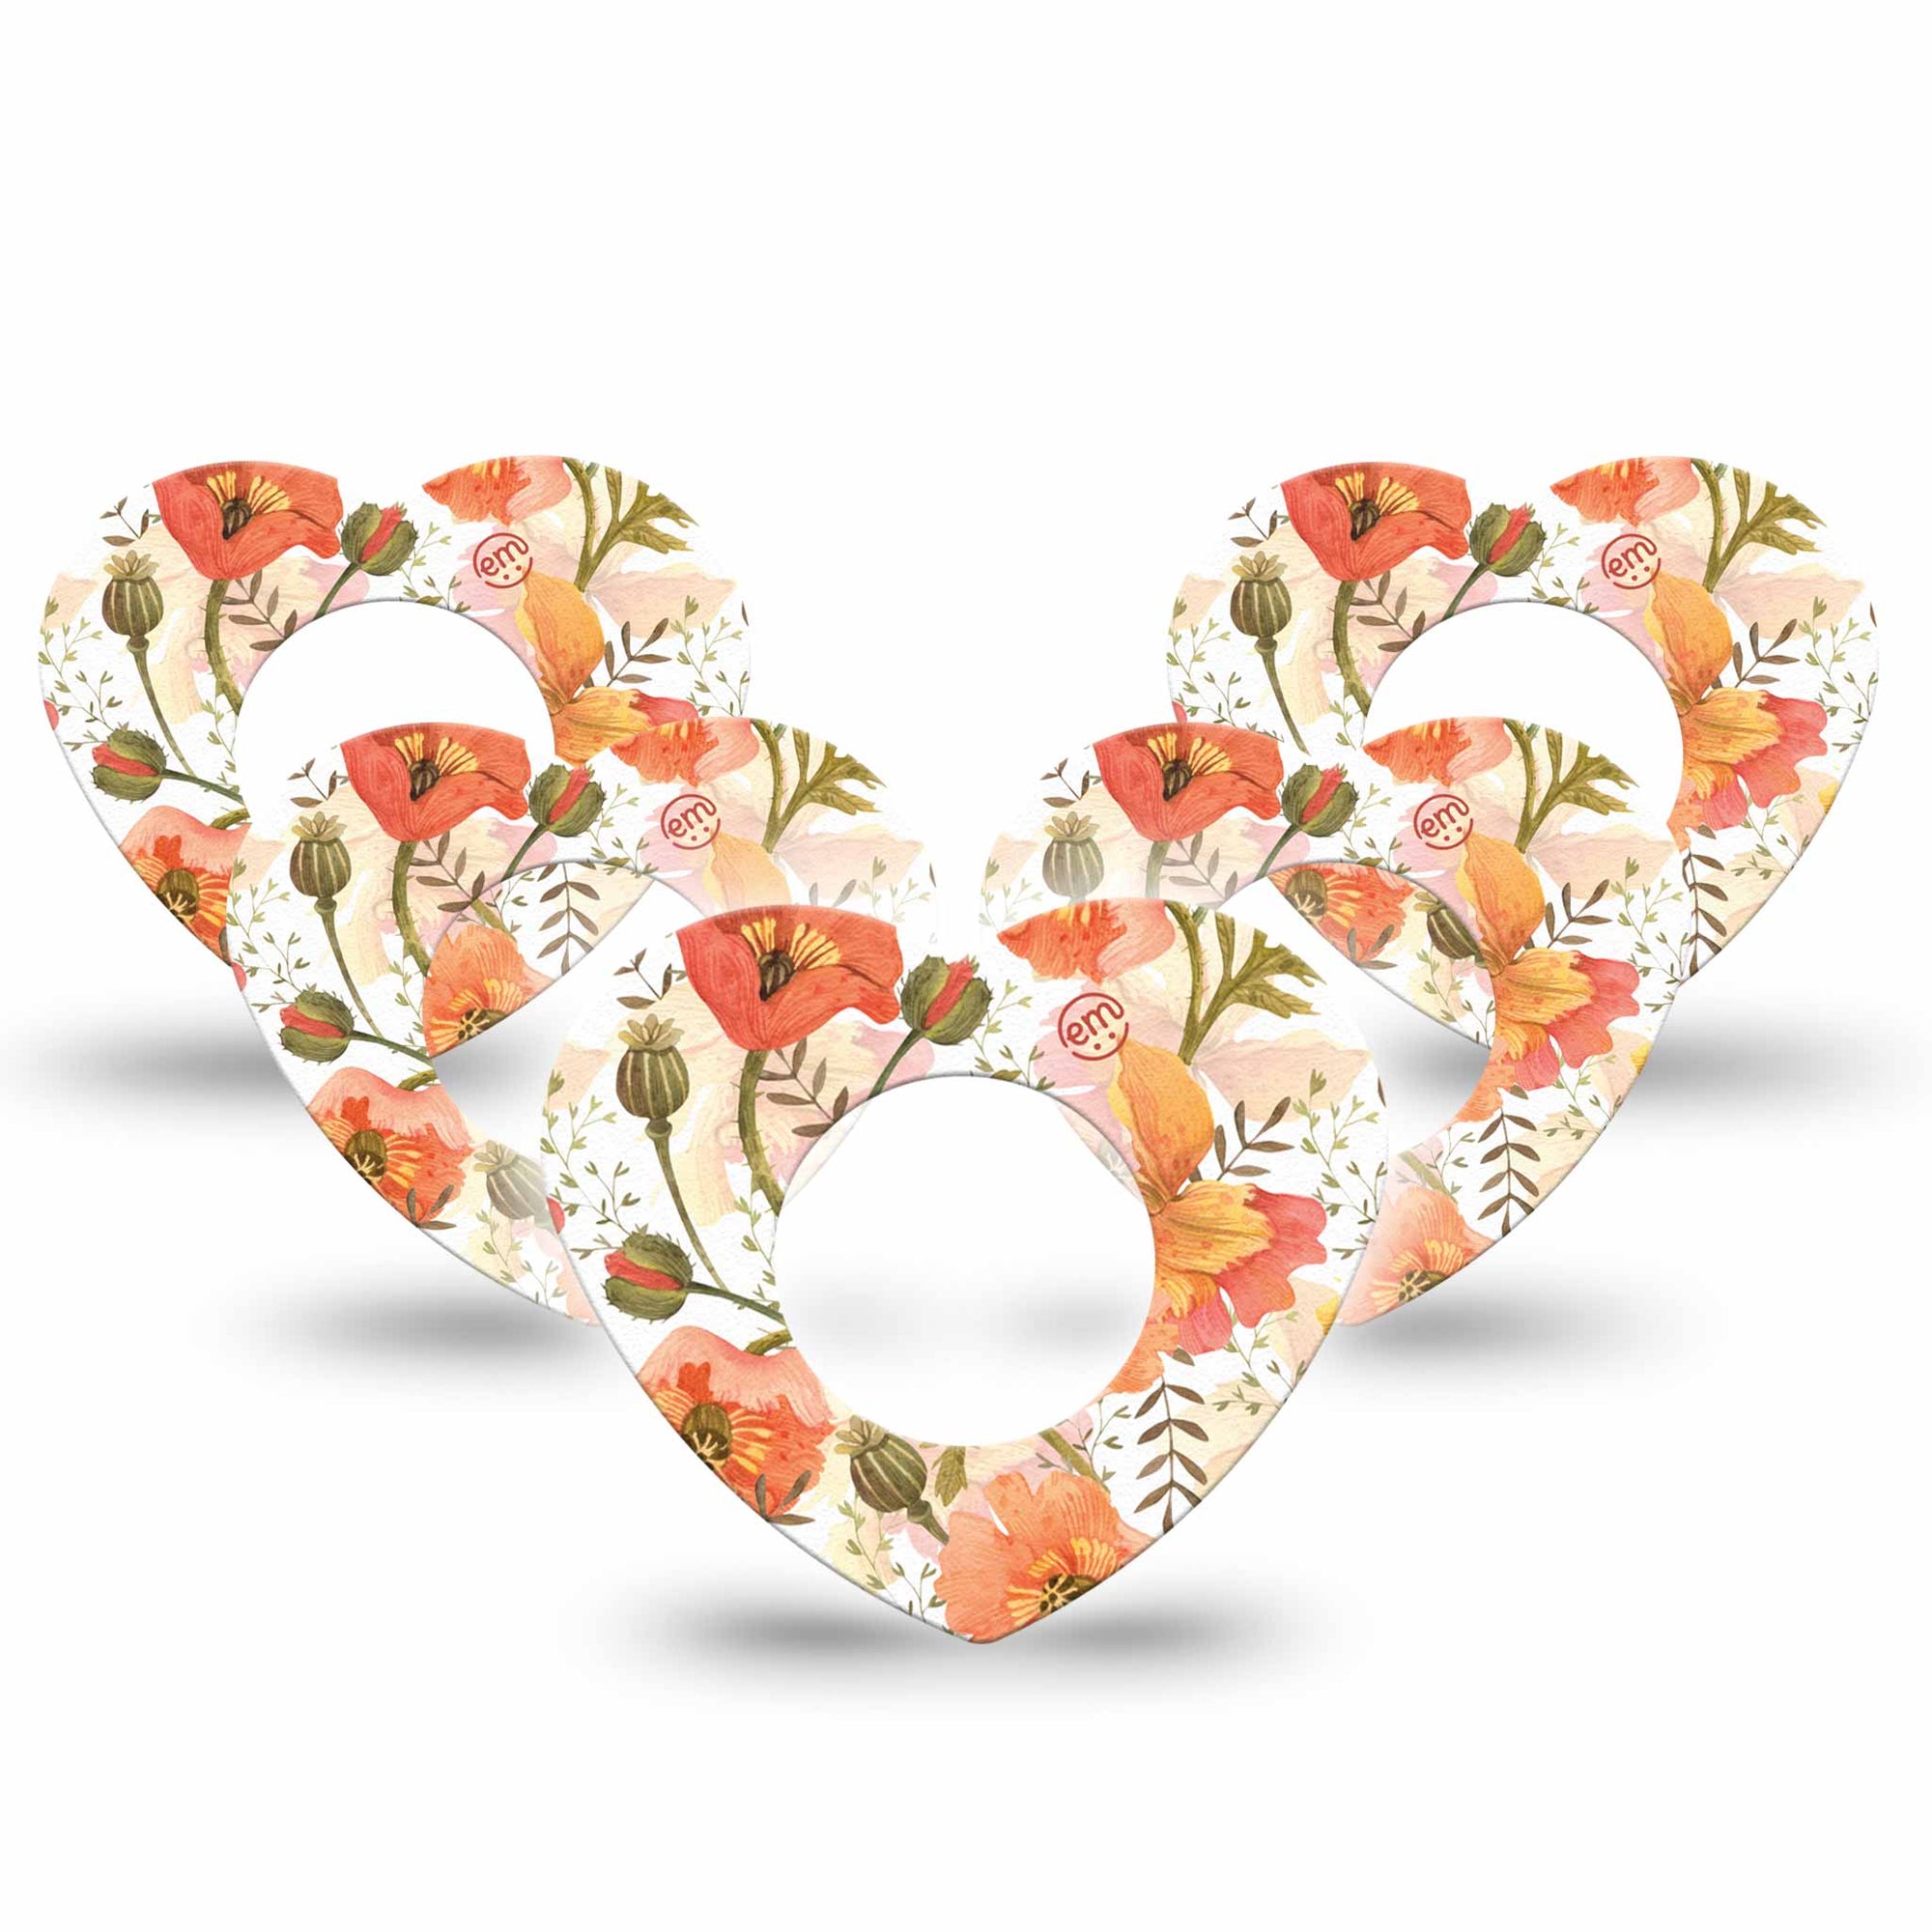 ExpressionMed Peachy Blooms Libre Heart Tapes, Abbott Lingo